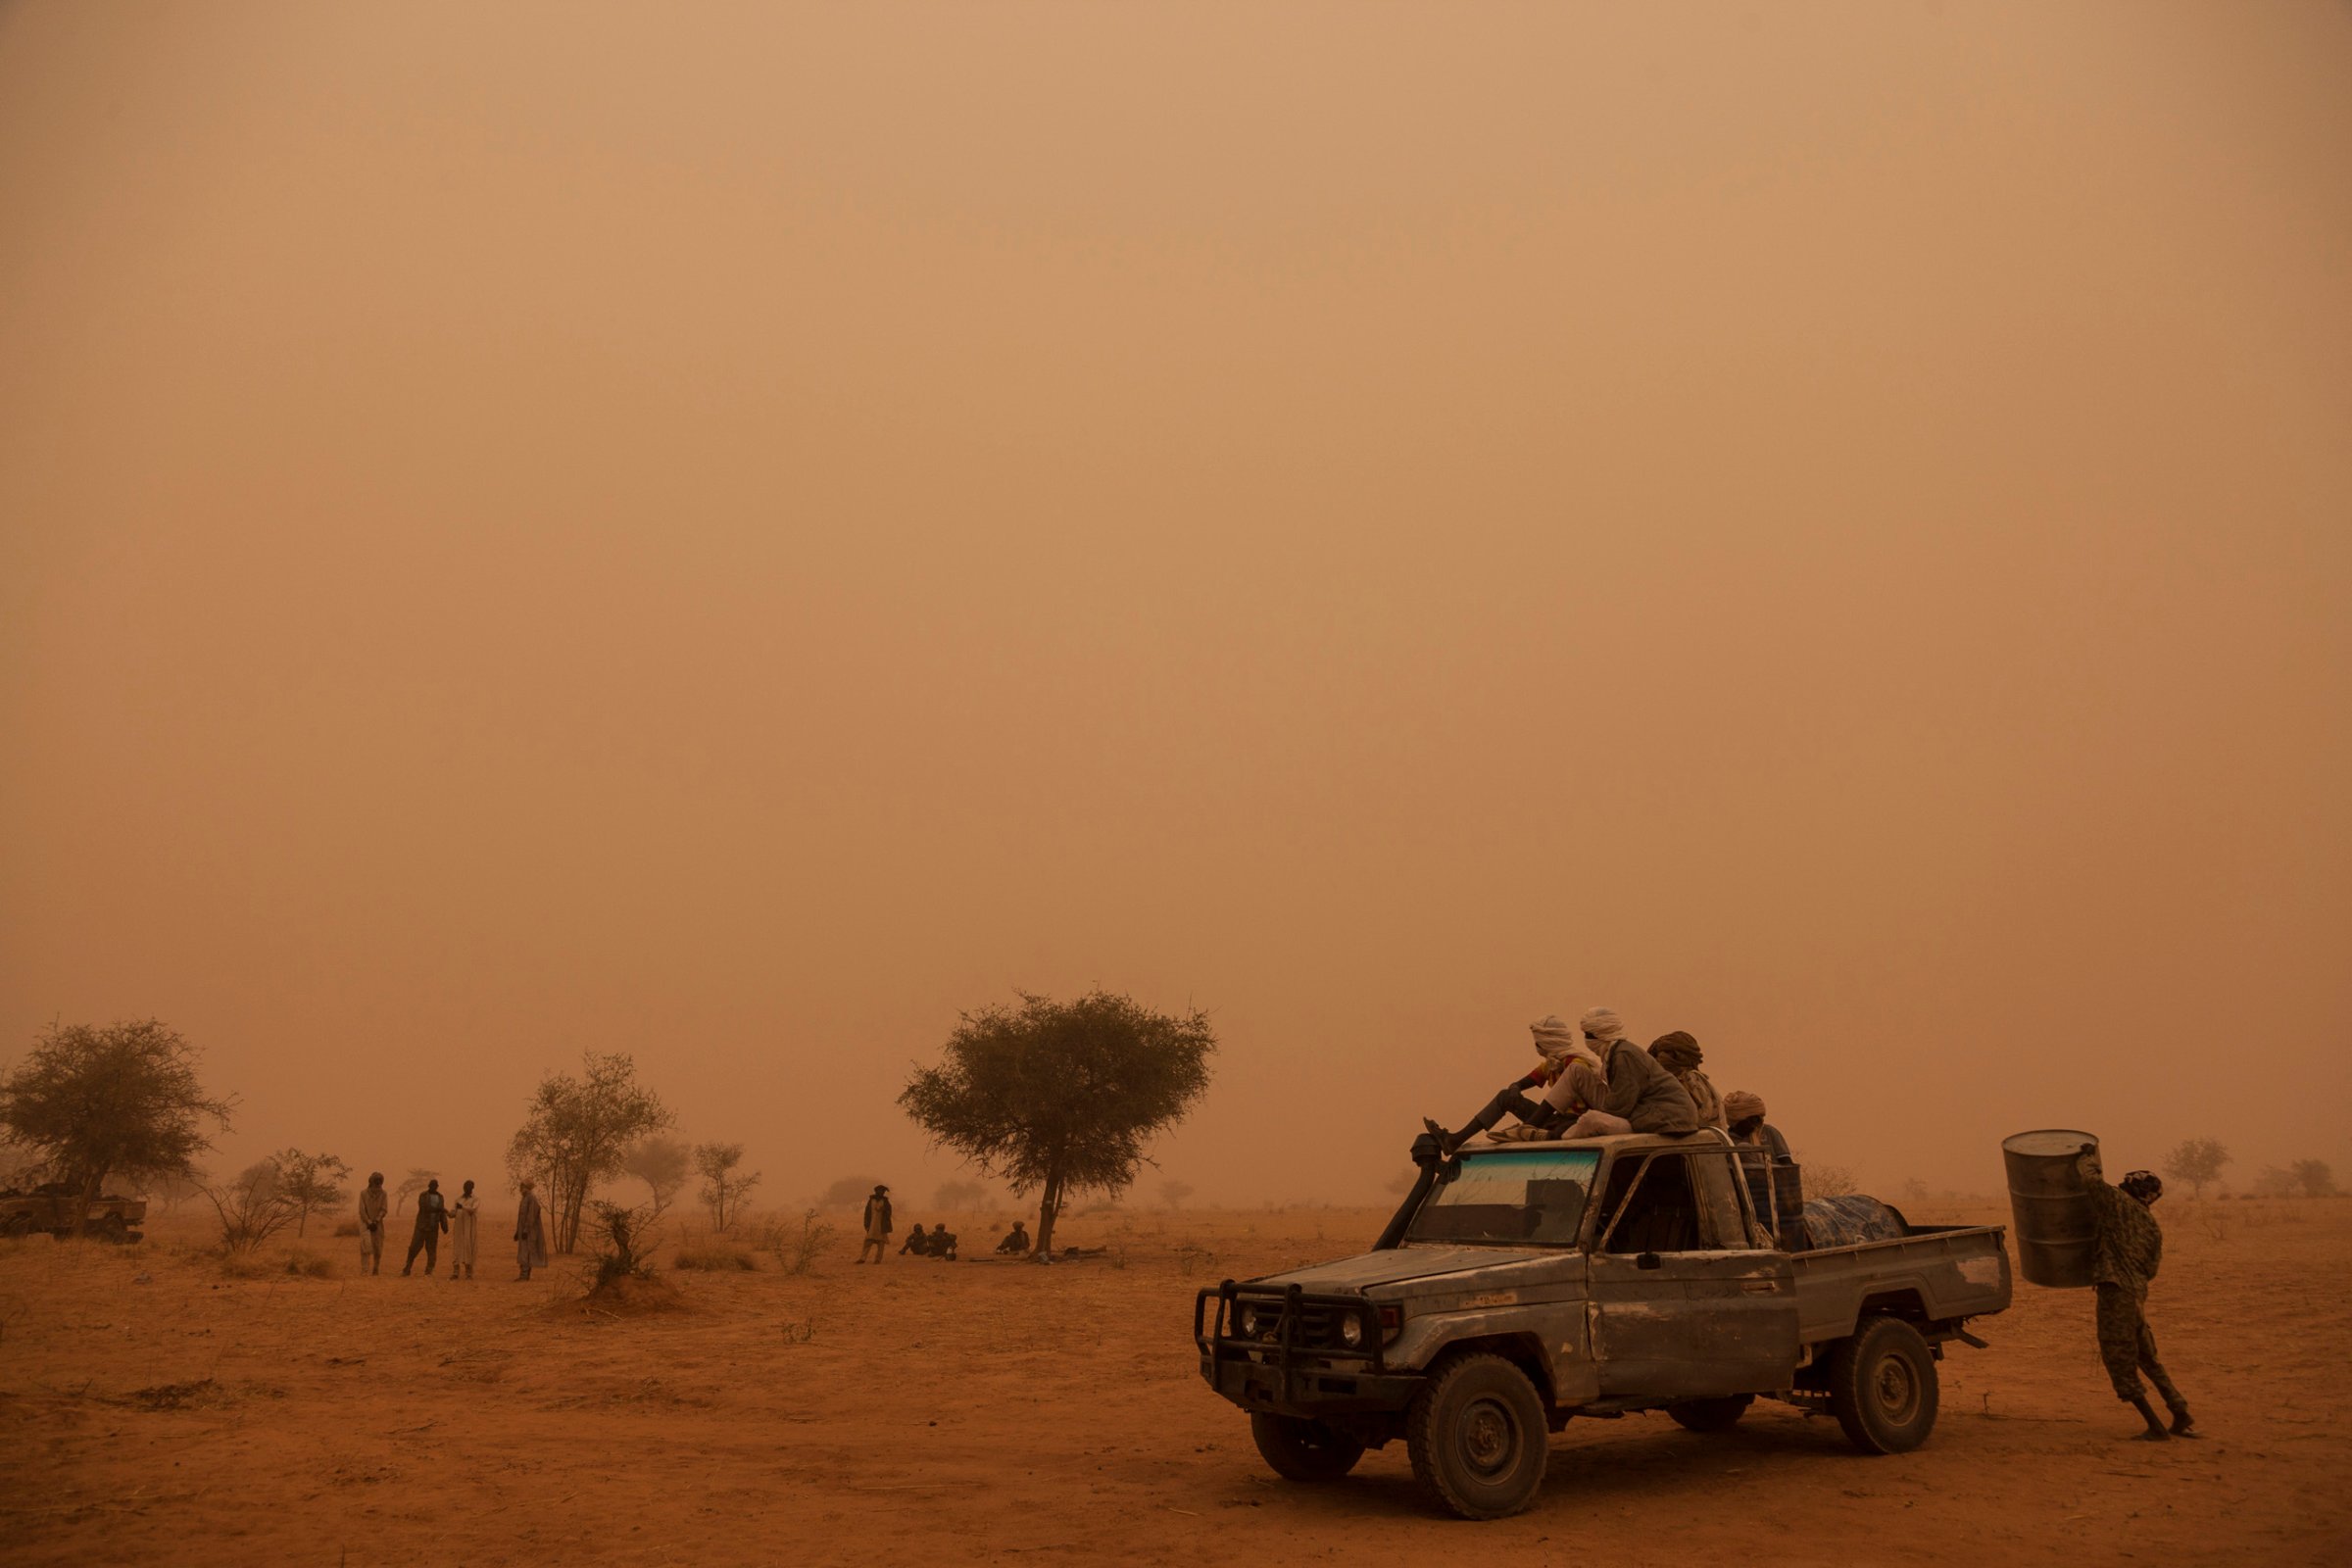 Rebel soldiers from the Sudan Liberation Army – Abdul Wahid (SLA-AW) prepare the truck to go for water in the middle of a sand storm in North Darfur, Sudan, on Feb. 24, 2015.